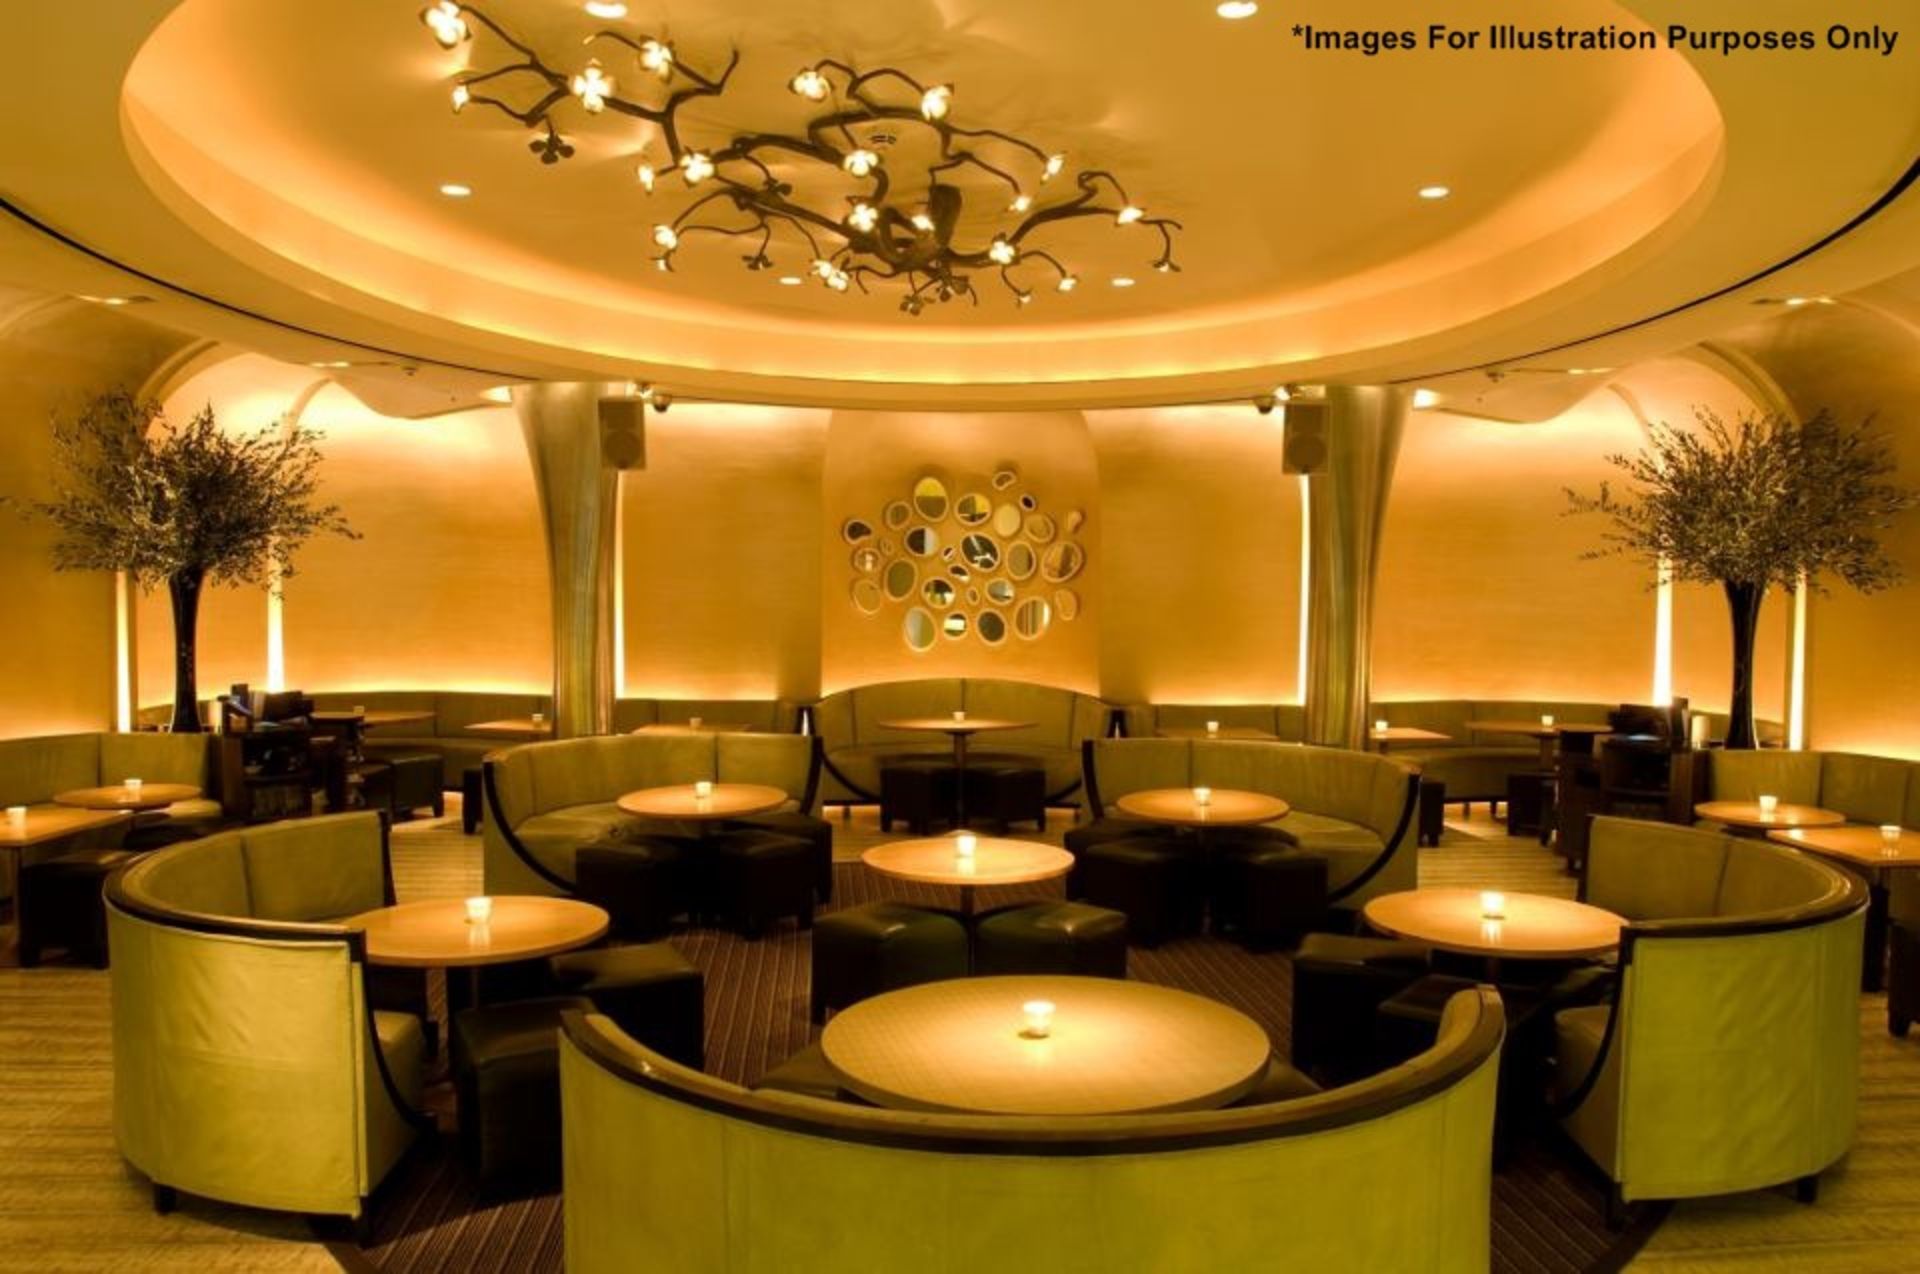 1 x Luxury Upholstered Curved Seating Area - Recently Removed From Nobu - Dimensions: W285 x D62cm x - Image 11 of 17